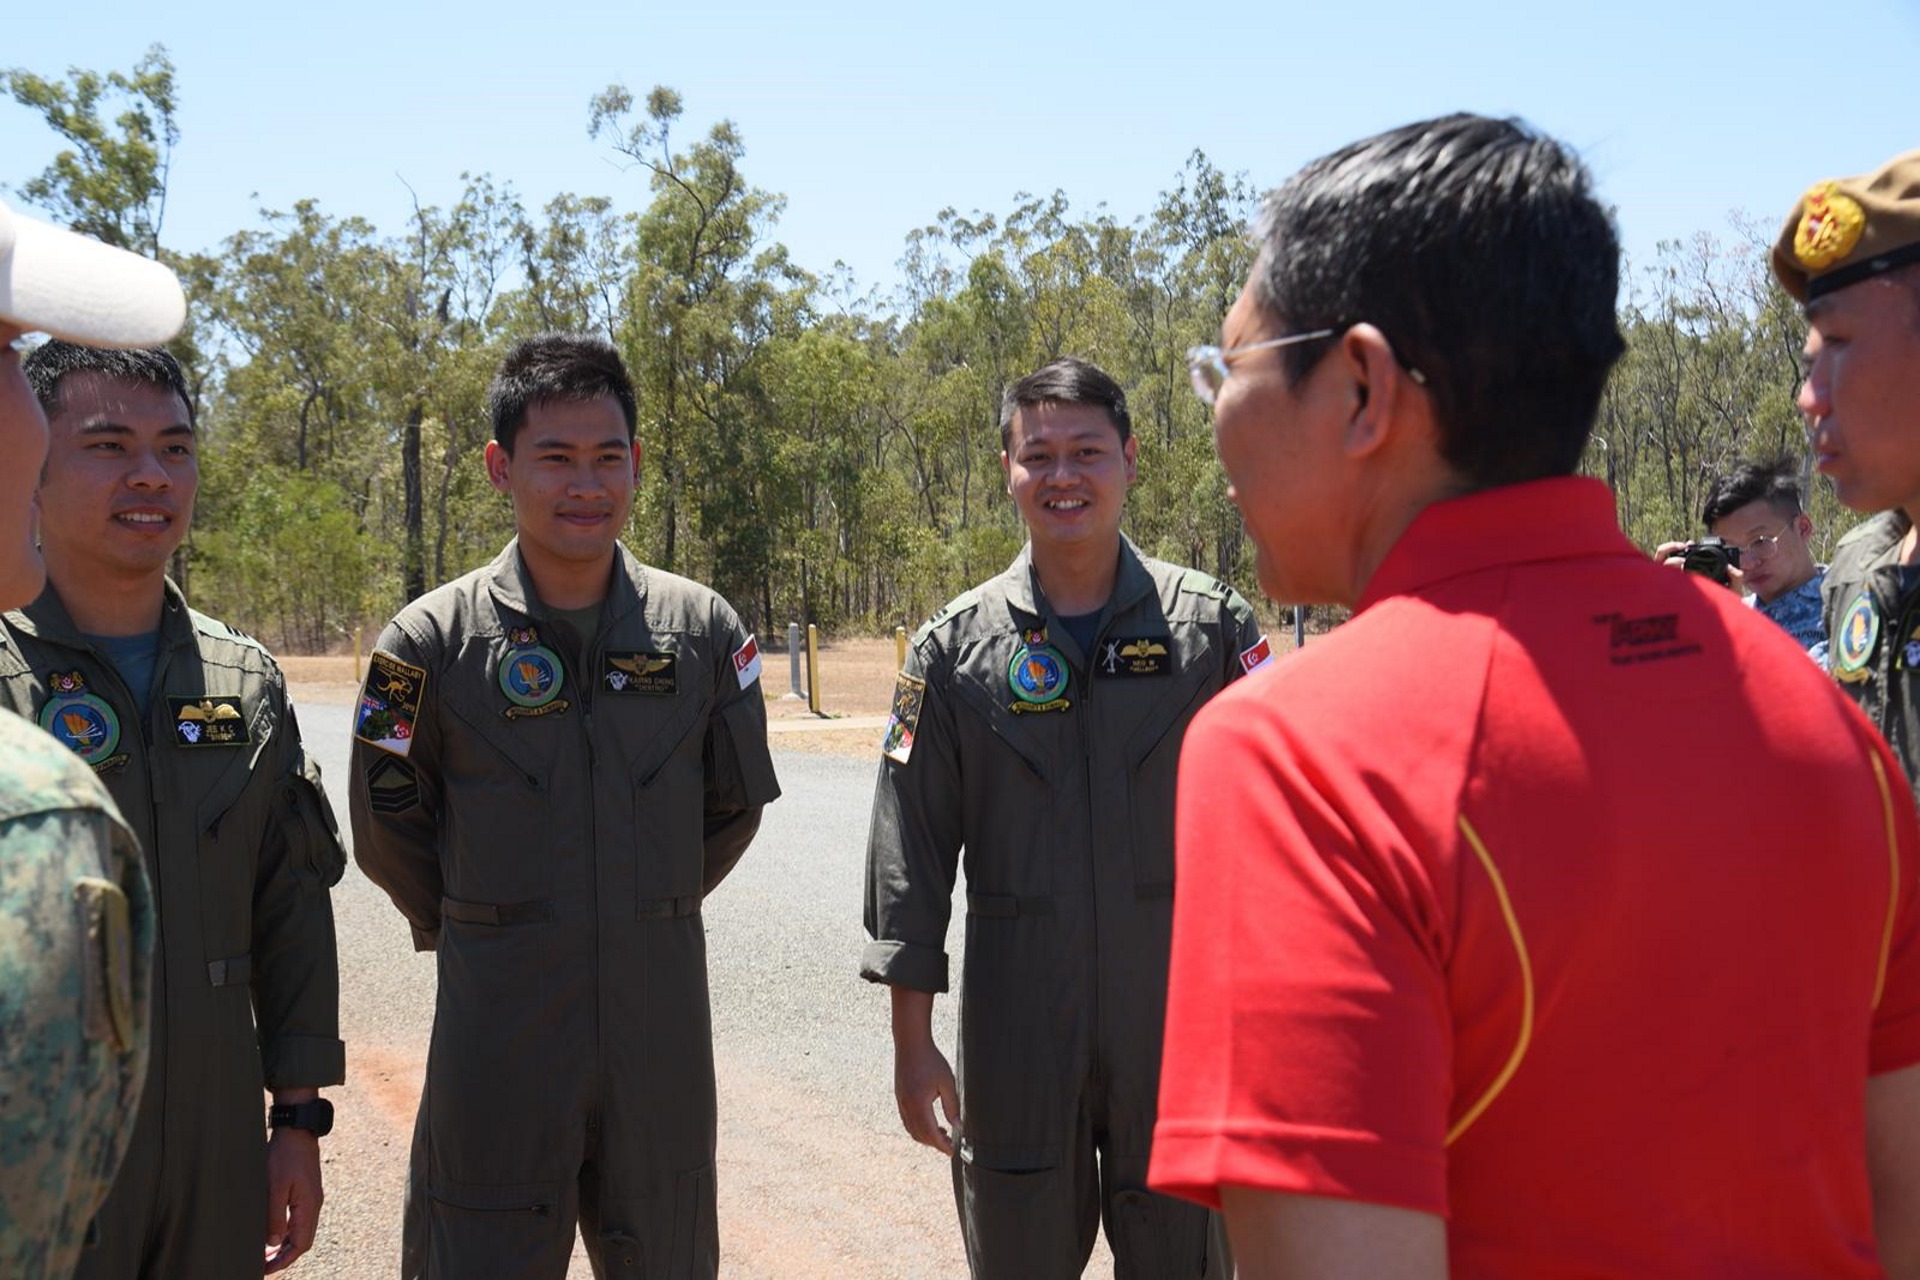 Dr Maliki interacting with Airforce personnel participating in Exercise Wallaby 2019.